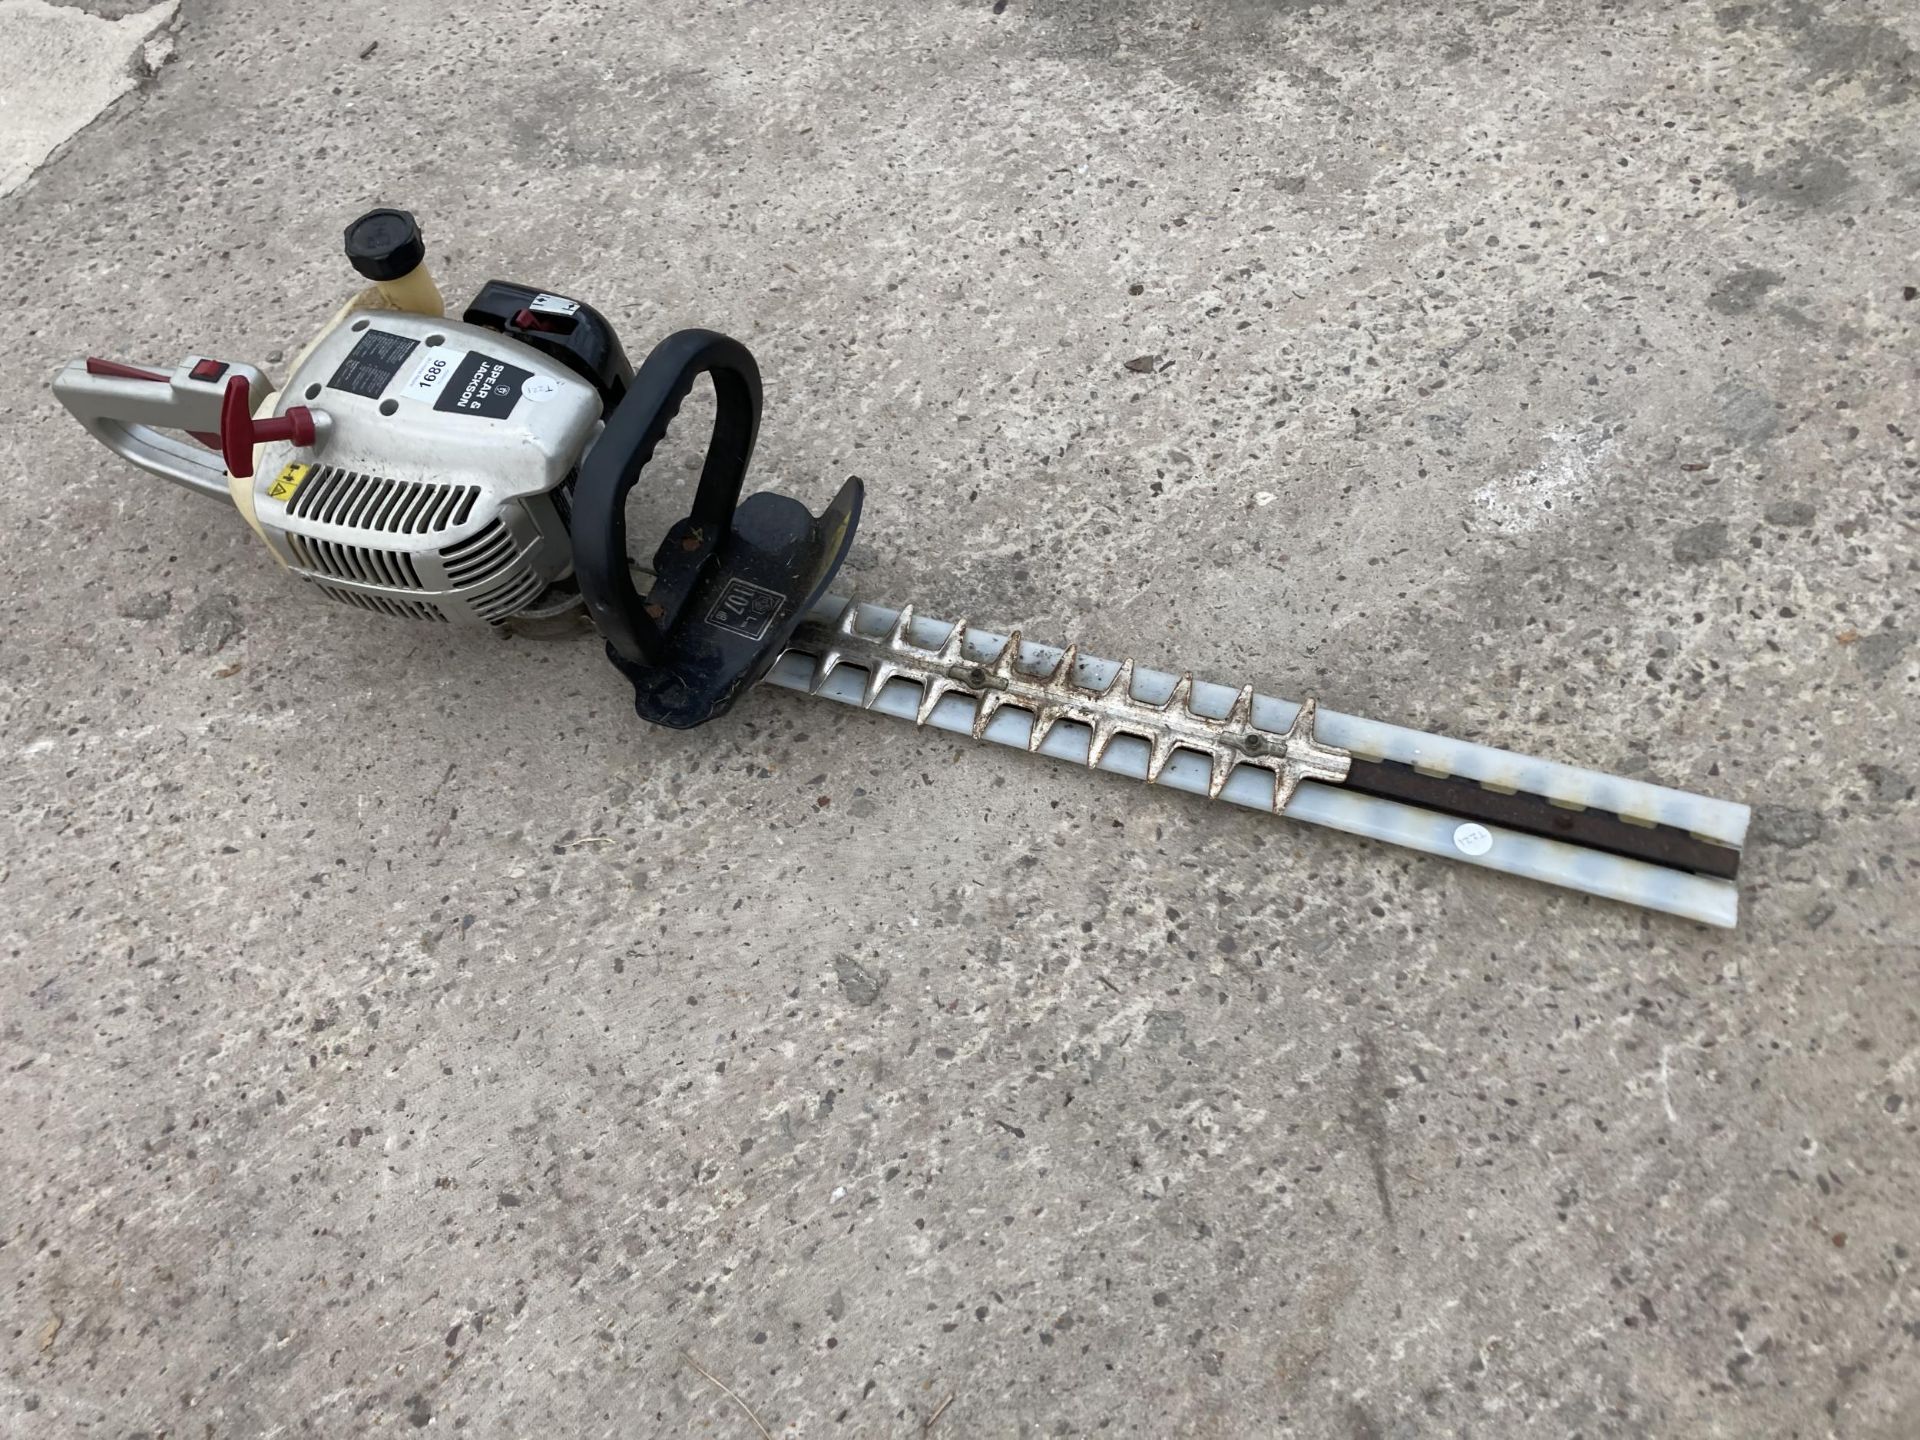 A PETROL SPEAR AND JACKSON HEDGE TRIMMER